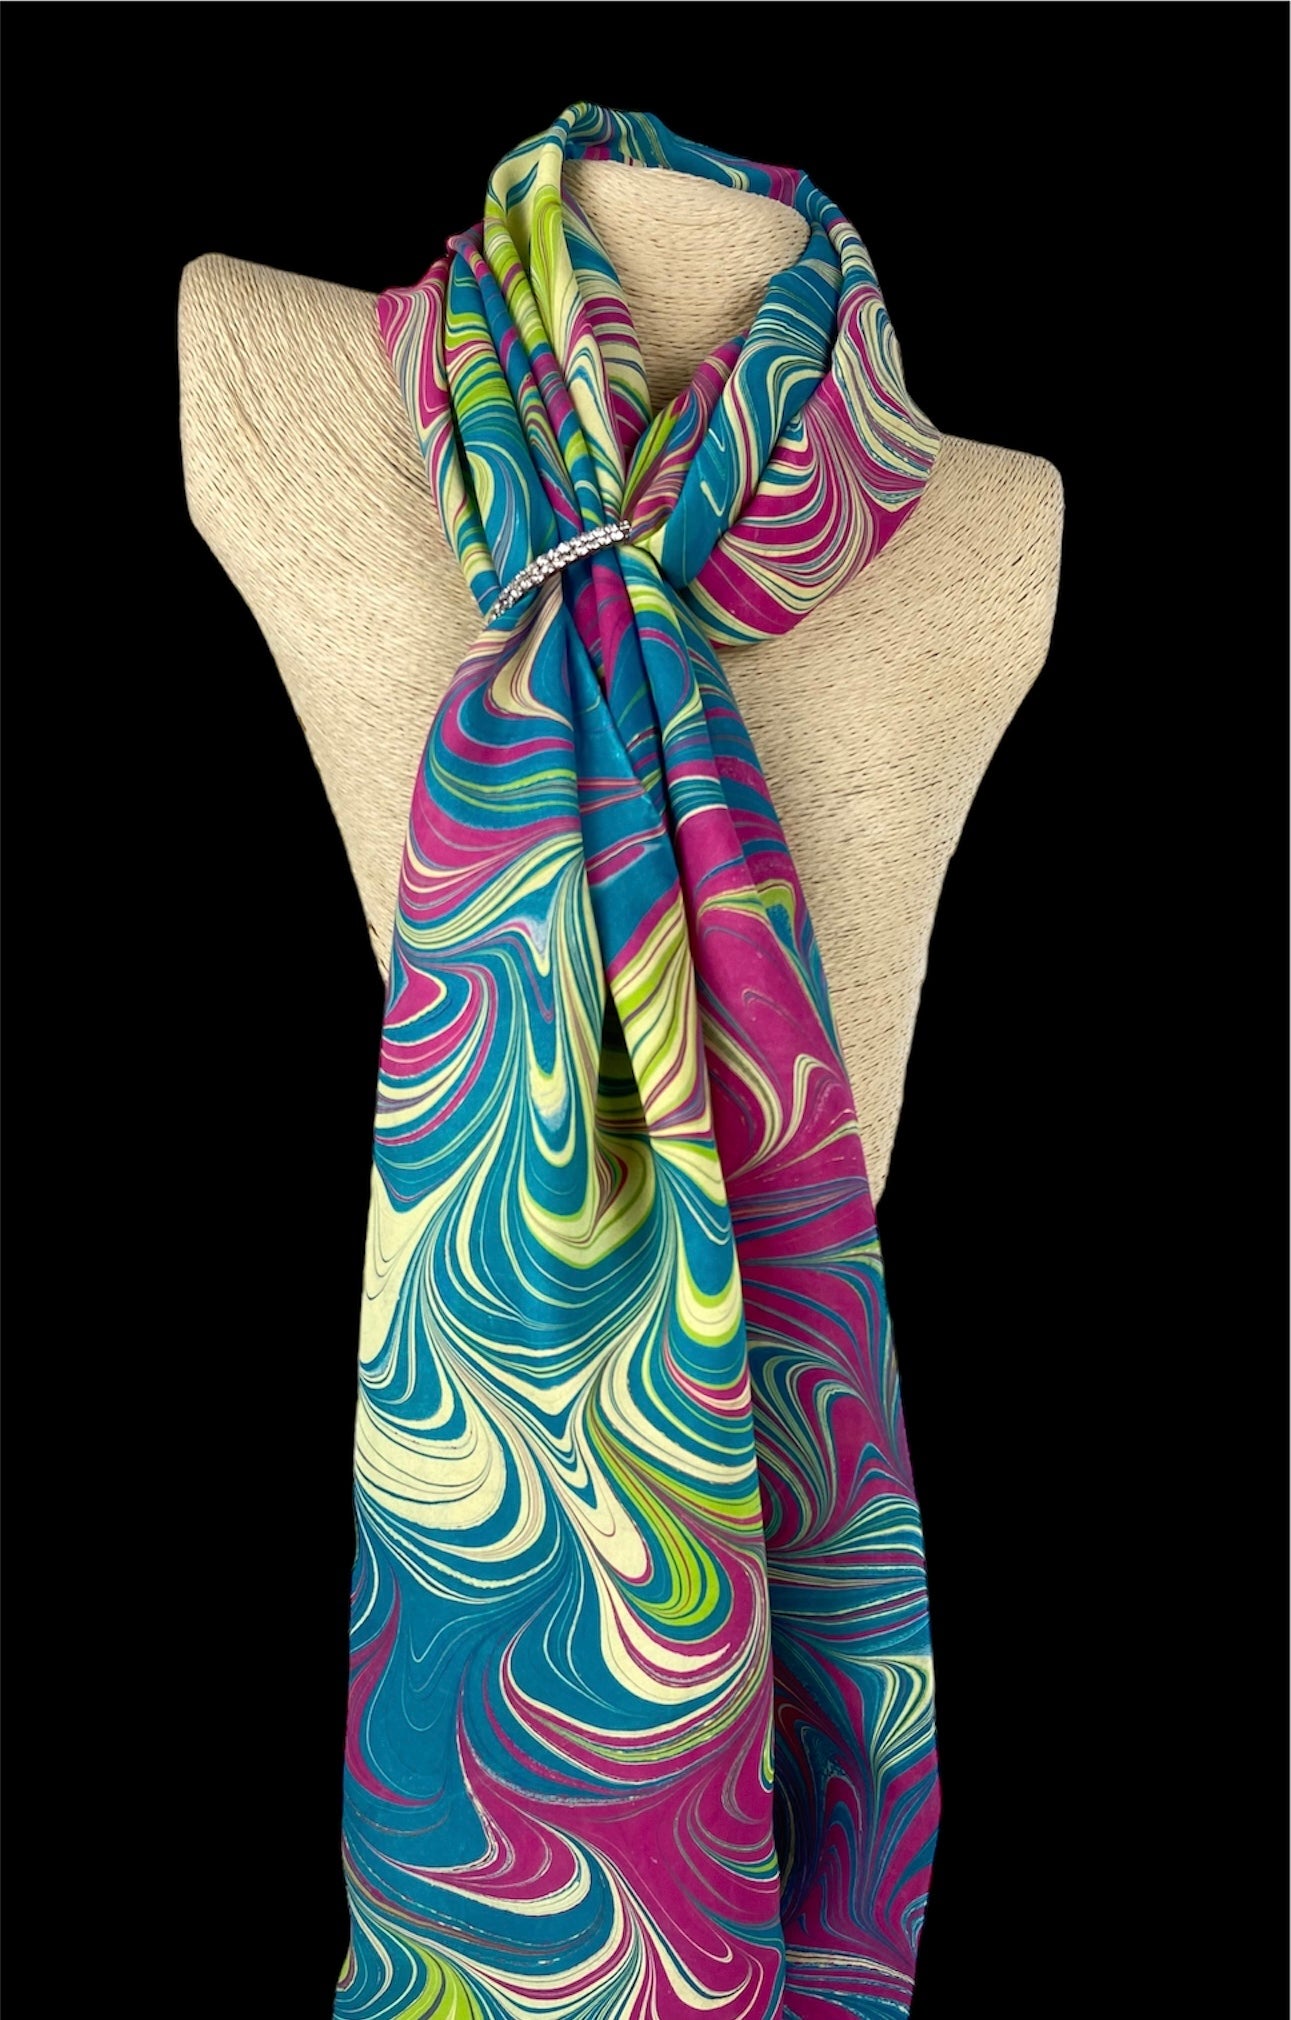 Pink, Teal, Lime and Soft Yellow Silk Scarf "Marcia"